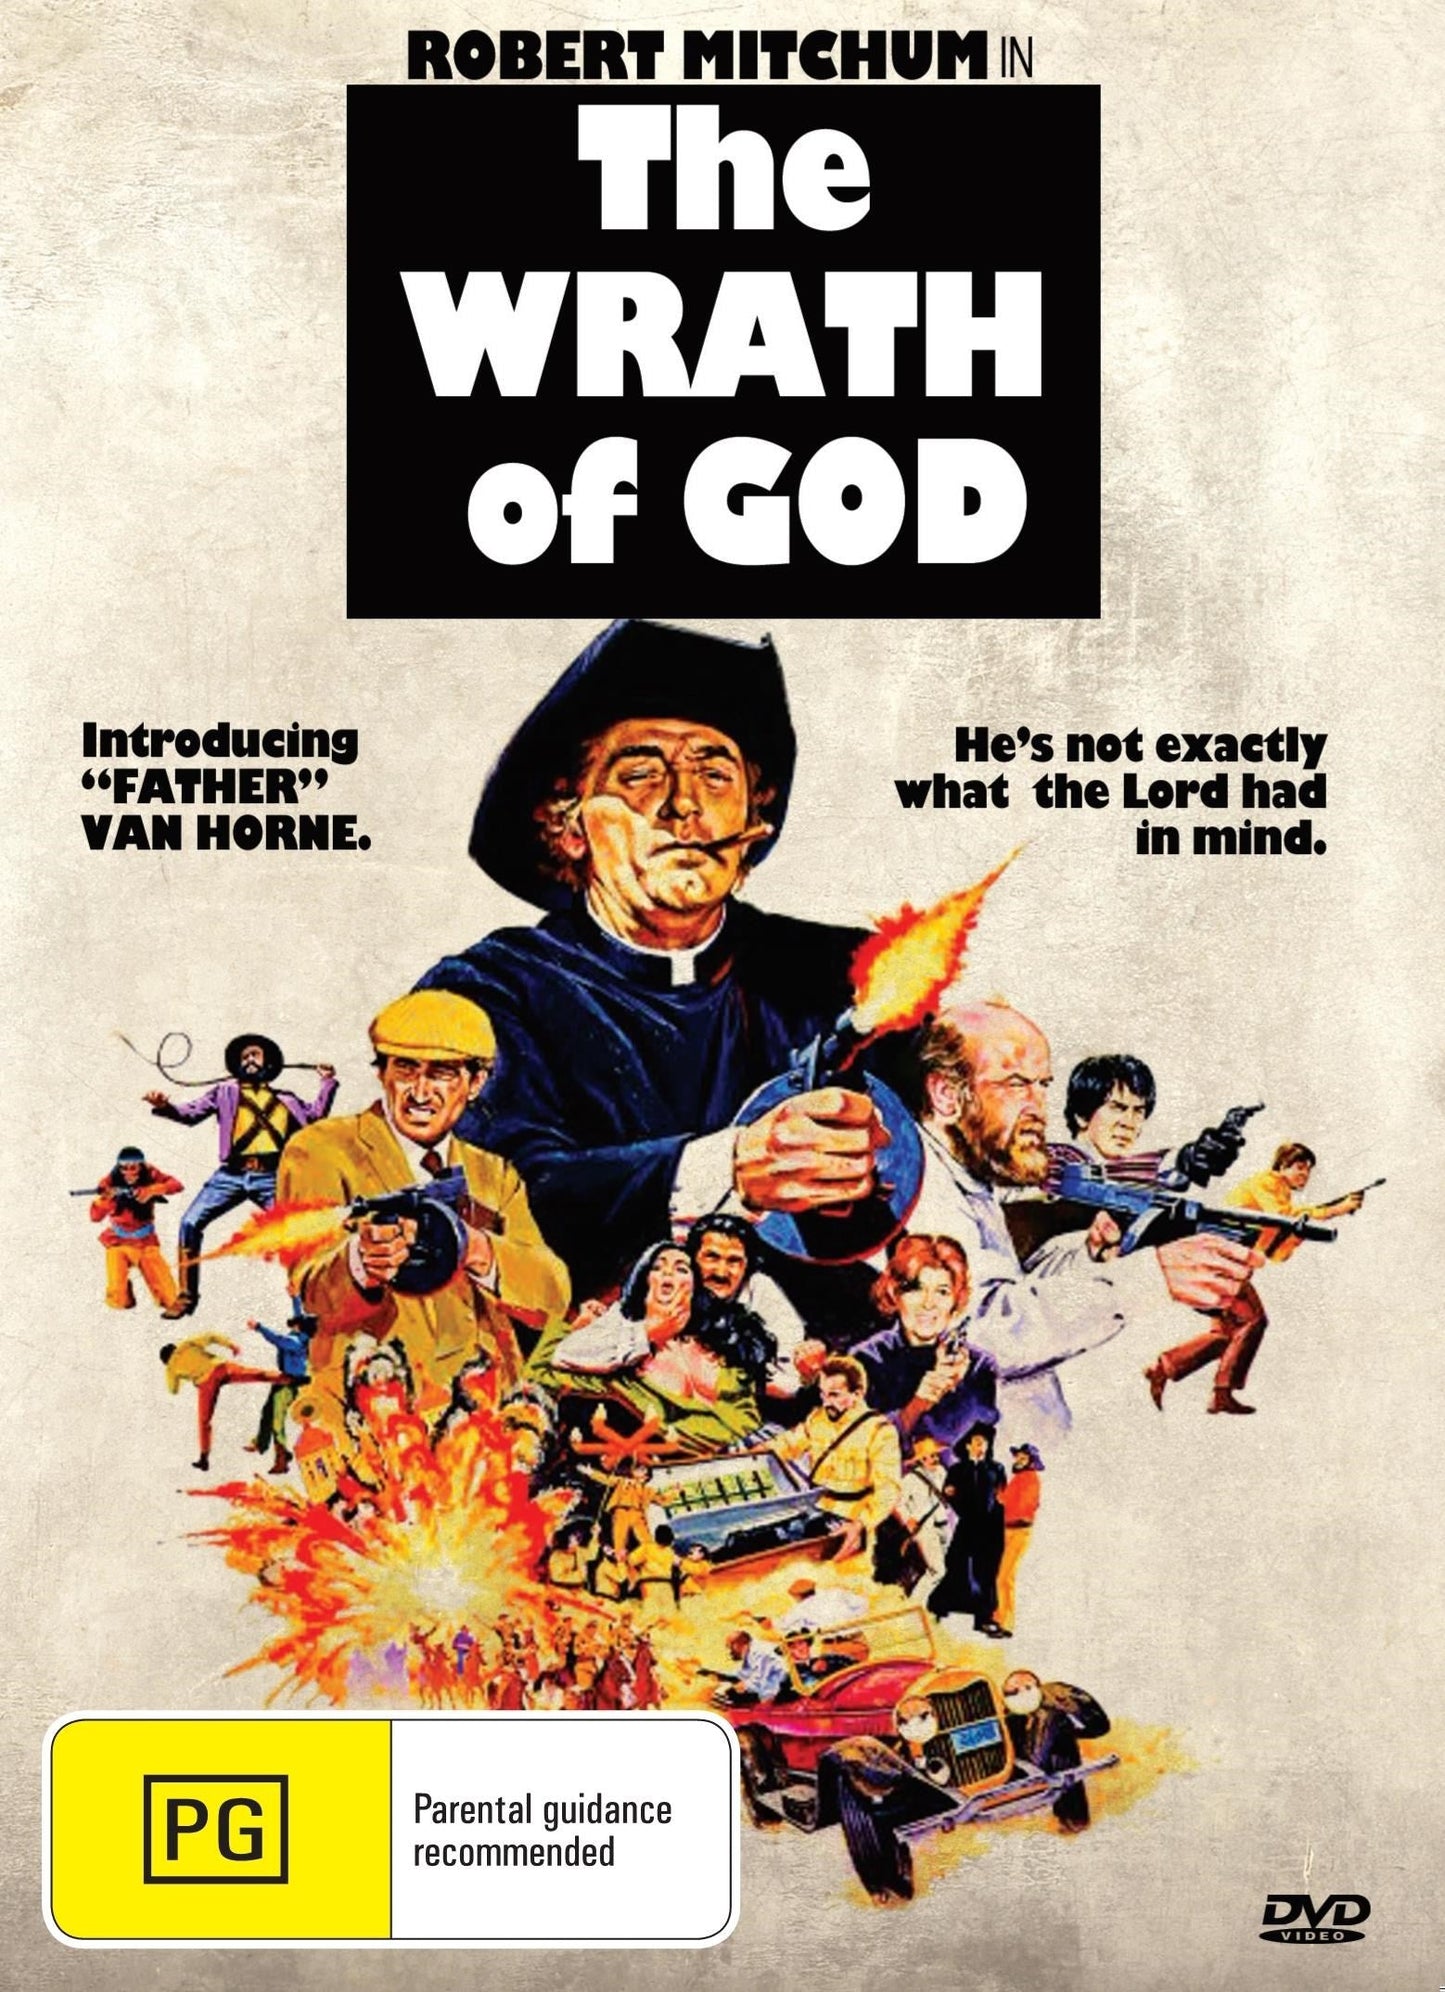 The Wrath of God rareandcollectibledvds